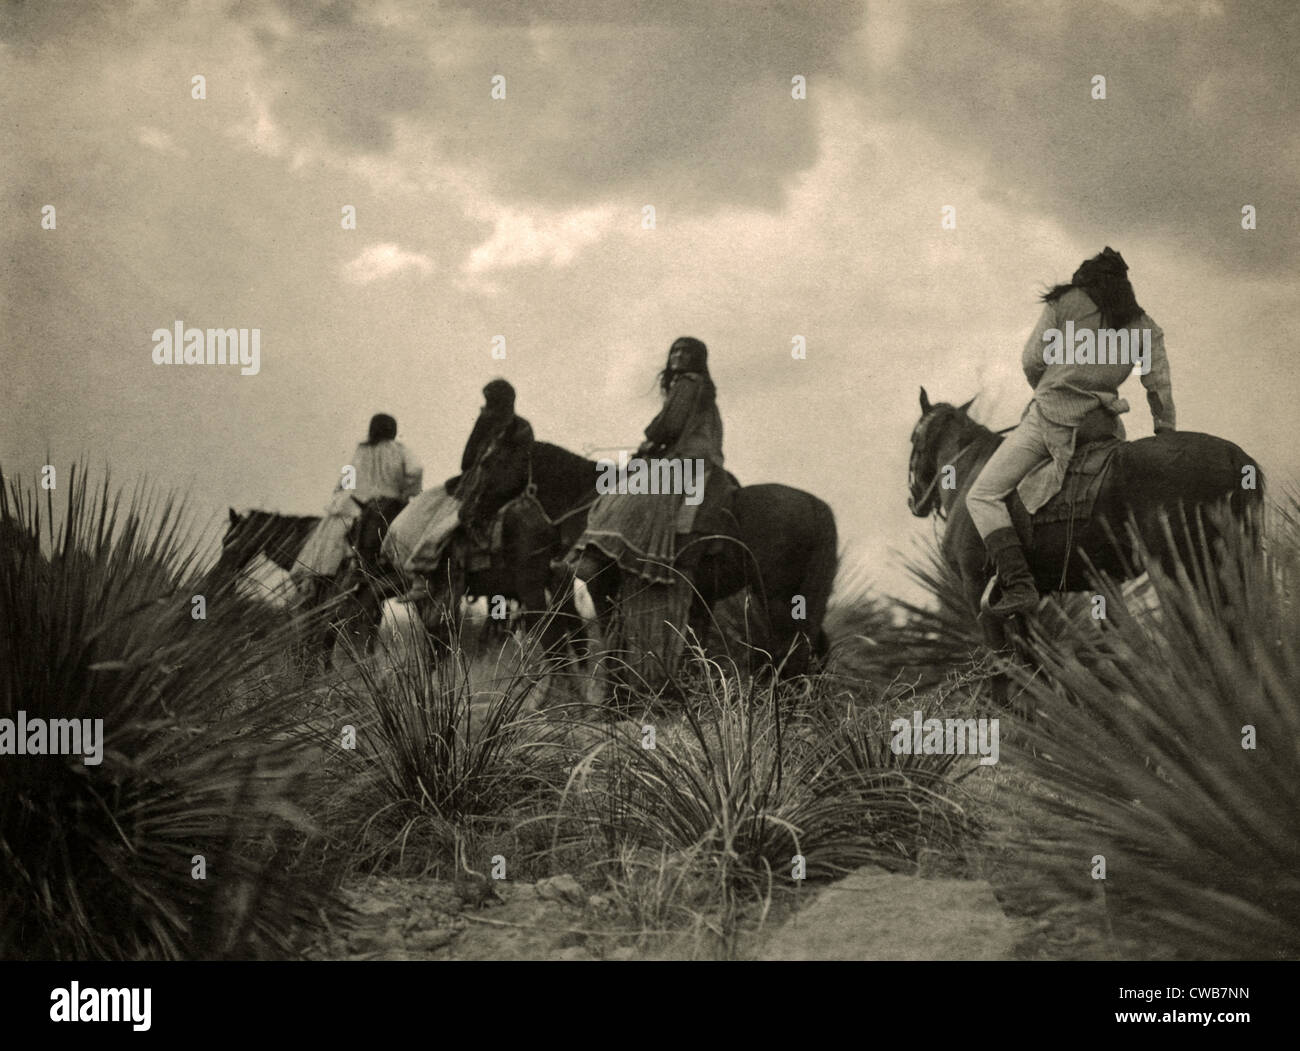 Apaches. Before the storm- Four Apache on horseback on horseback under storm clouds. photo by Edward S. Curtis, 1906 Stock Photo